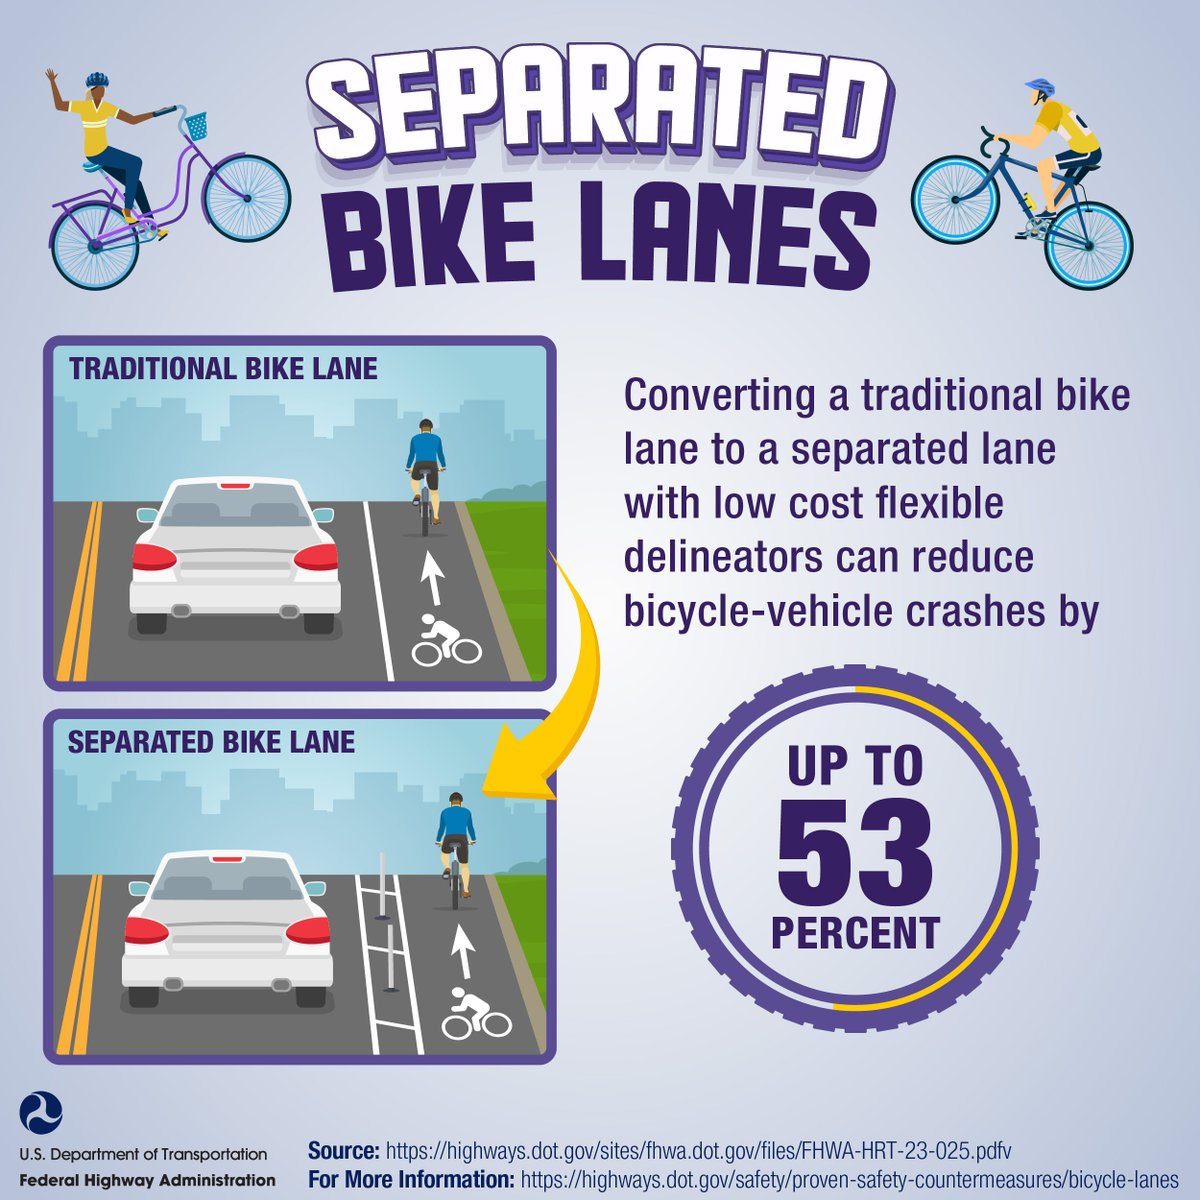 Converting a traditional bike lane to a separated lane with low-cost flexible delineators can reduce bicycle-vehicle crashes by up to 53%. #NationalBikeMonth highways.dot.gov/safety/proven-…